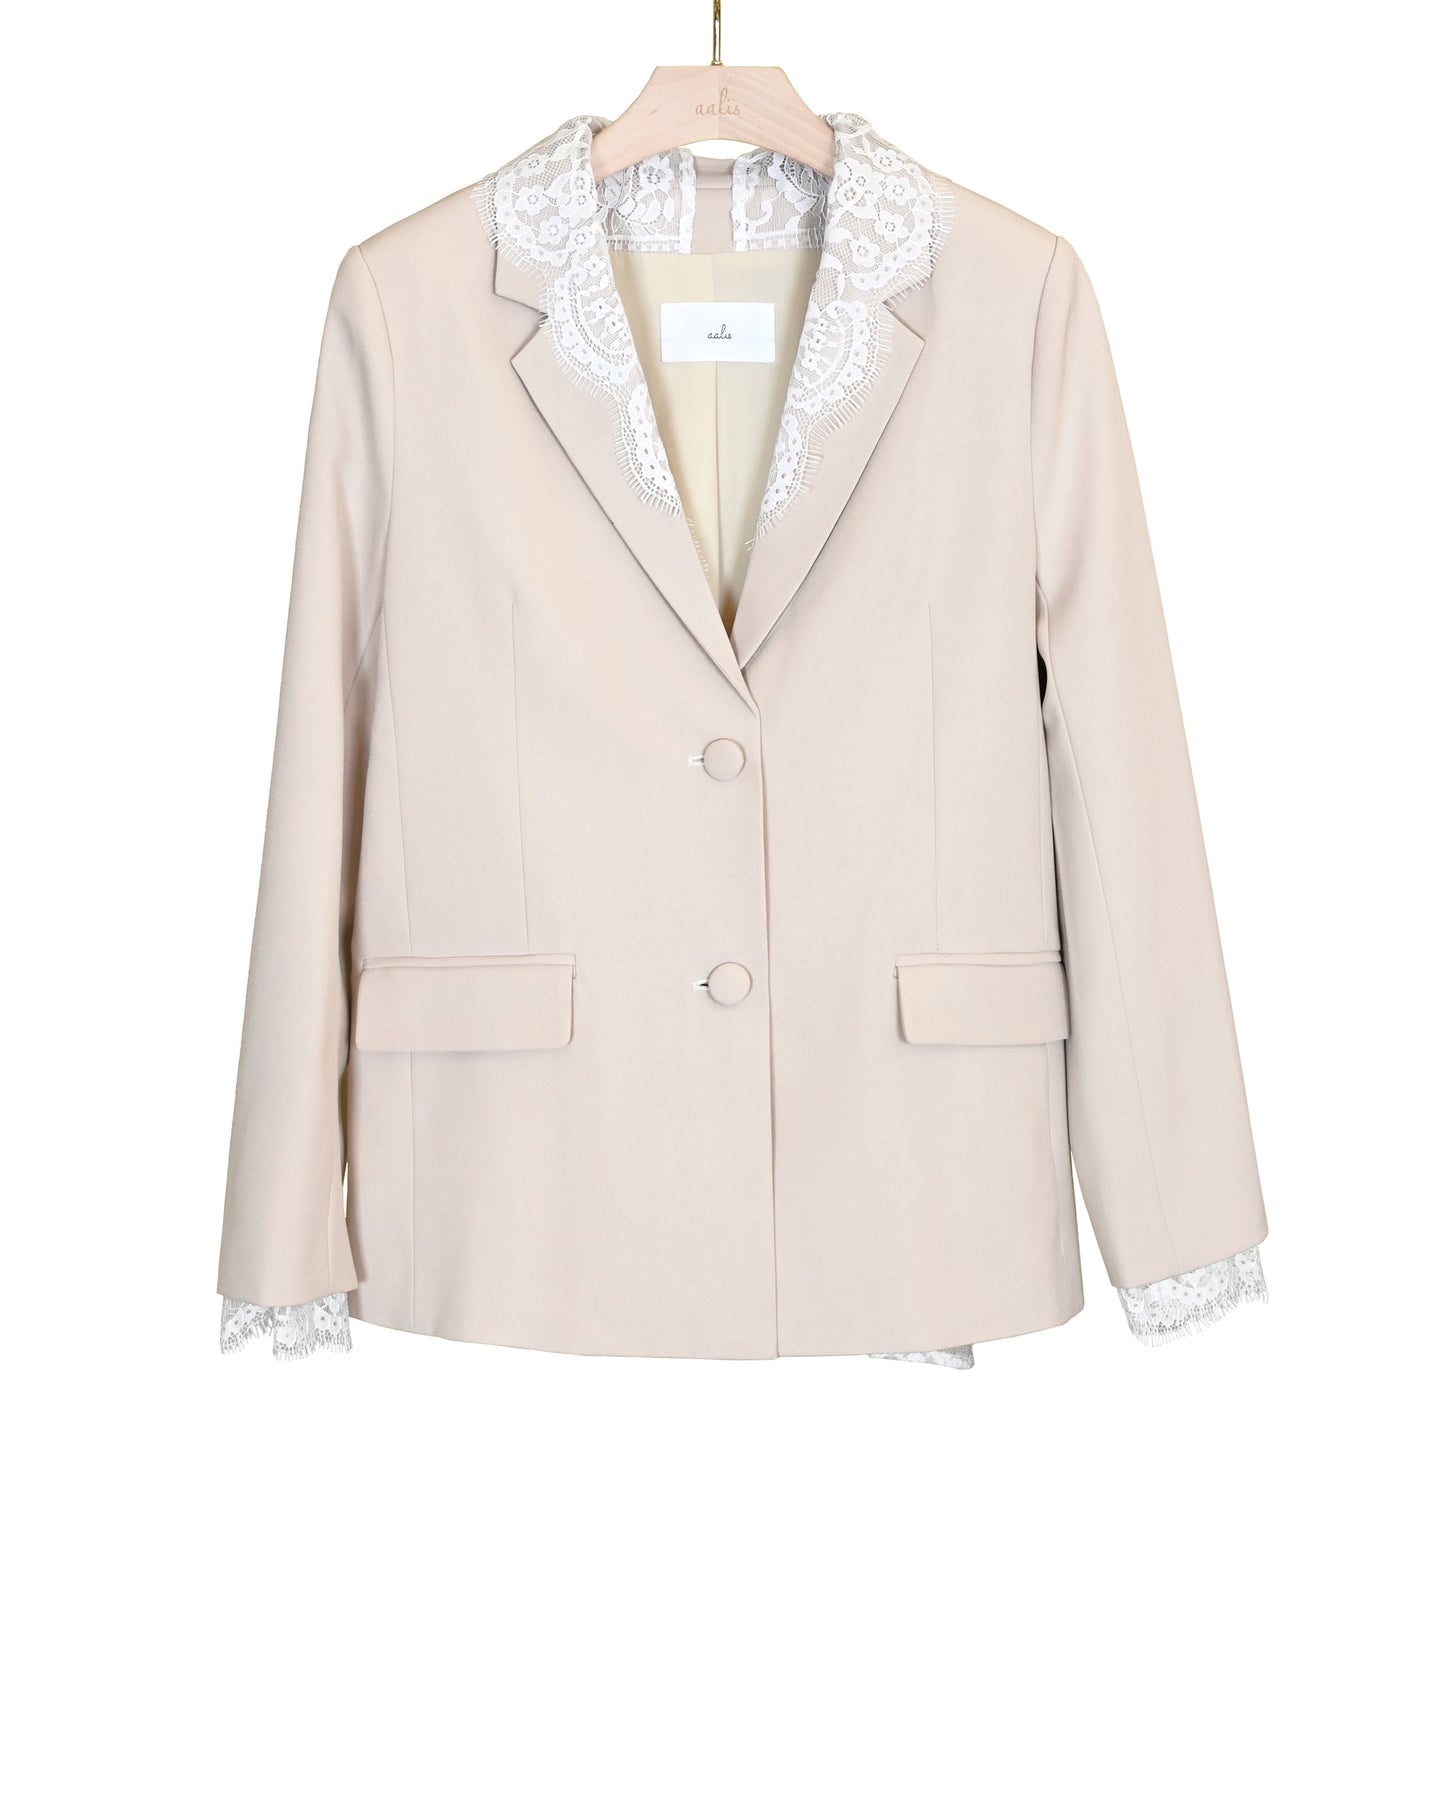 Load image into Gallery viewer, aalis INDA lace trim blazer (Beige)
